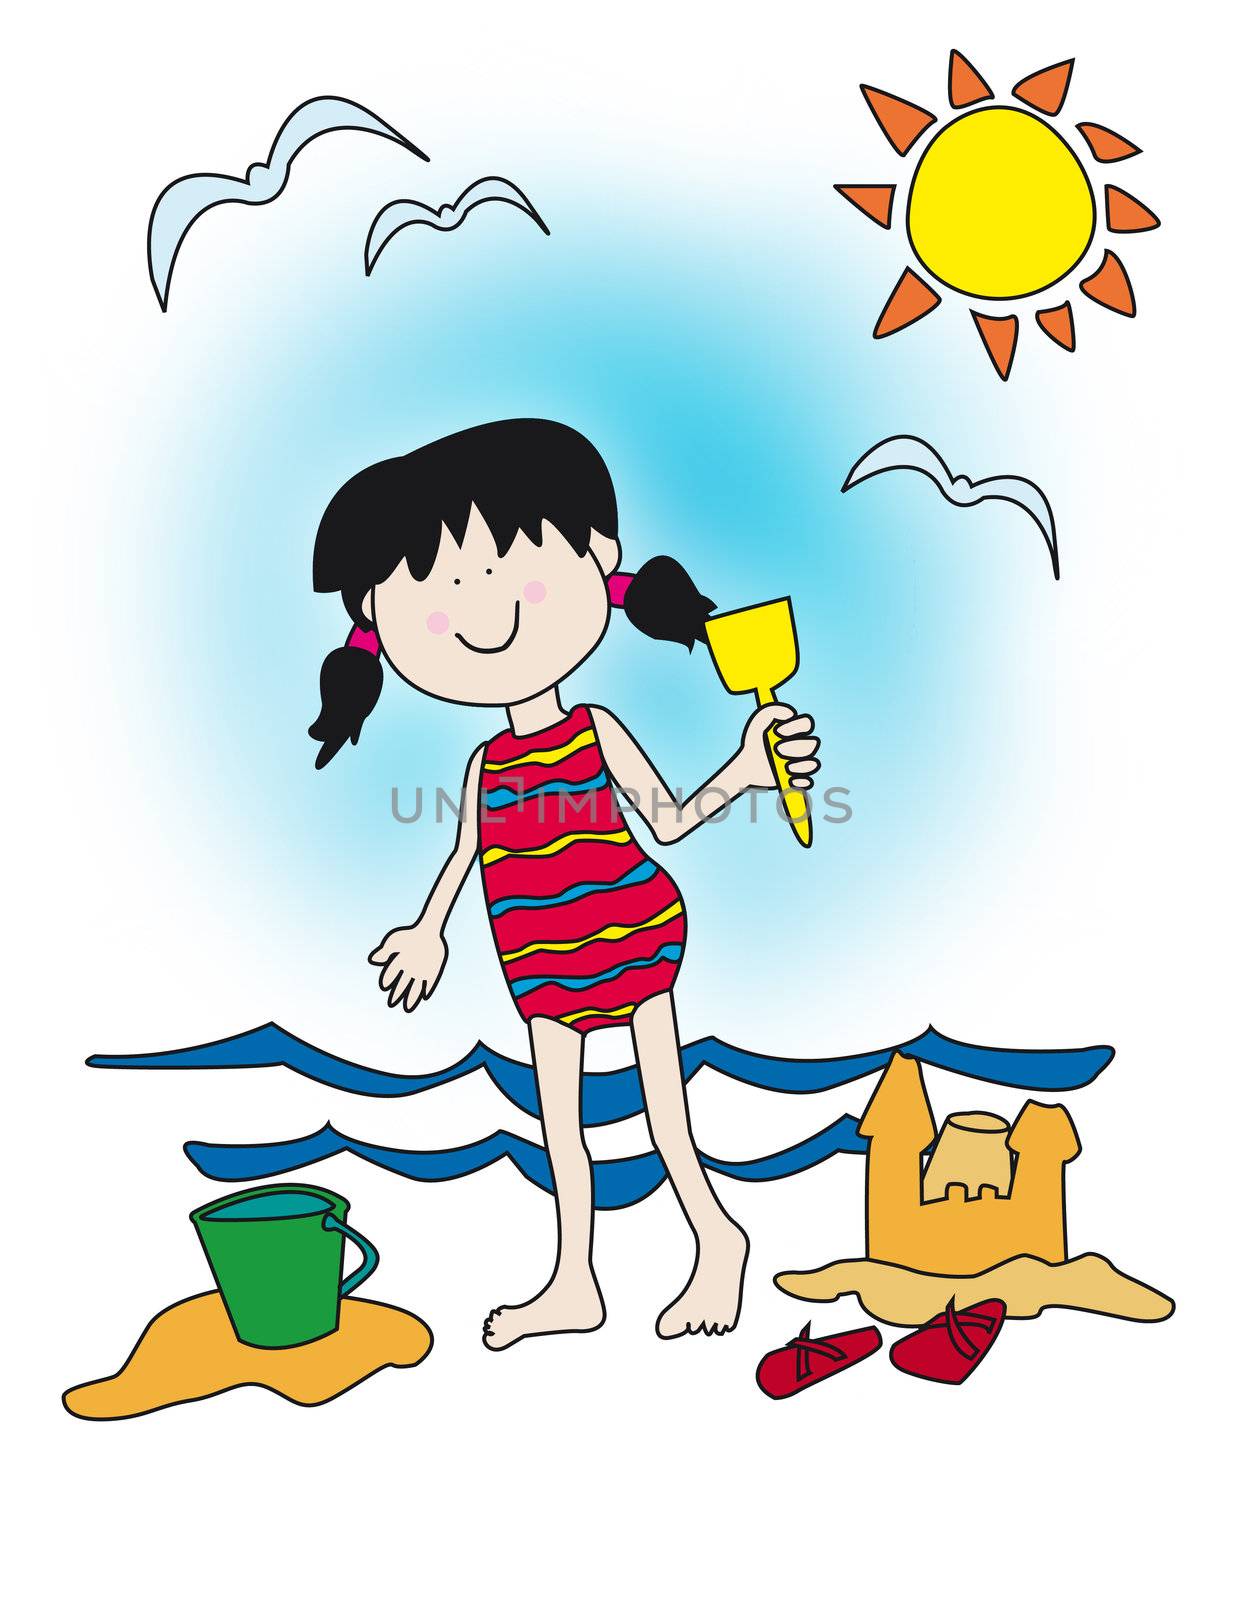 Large childlike cartoon character: little girl with a big smile playing at the beach, building sand castle.